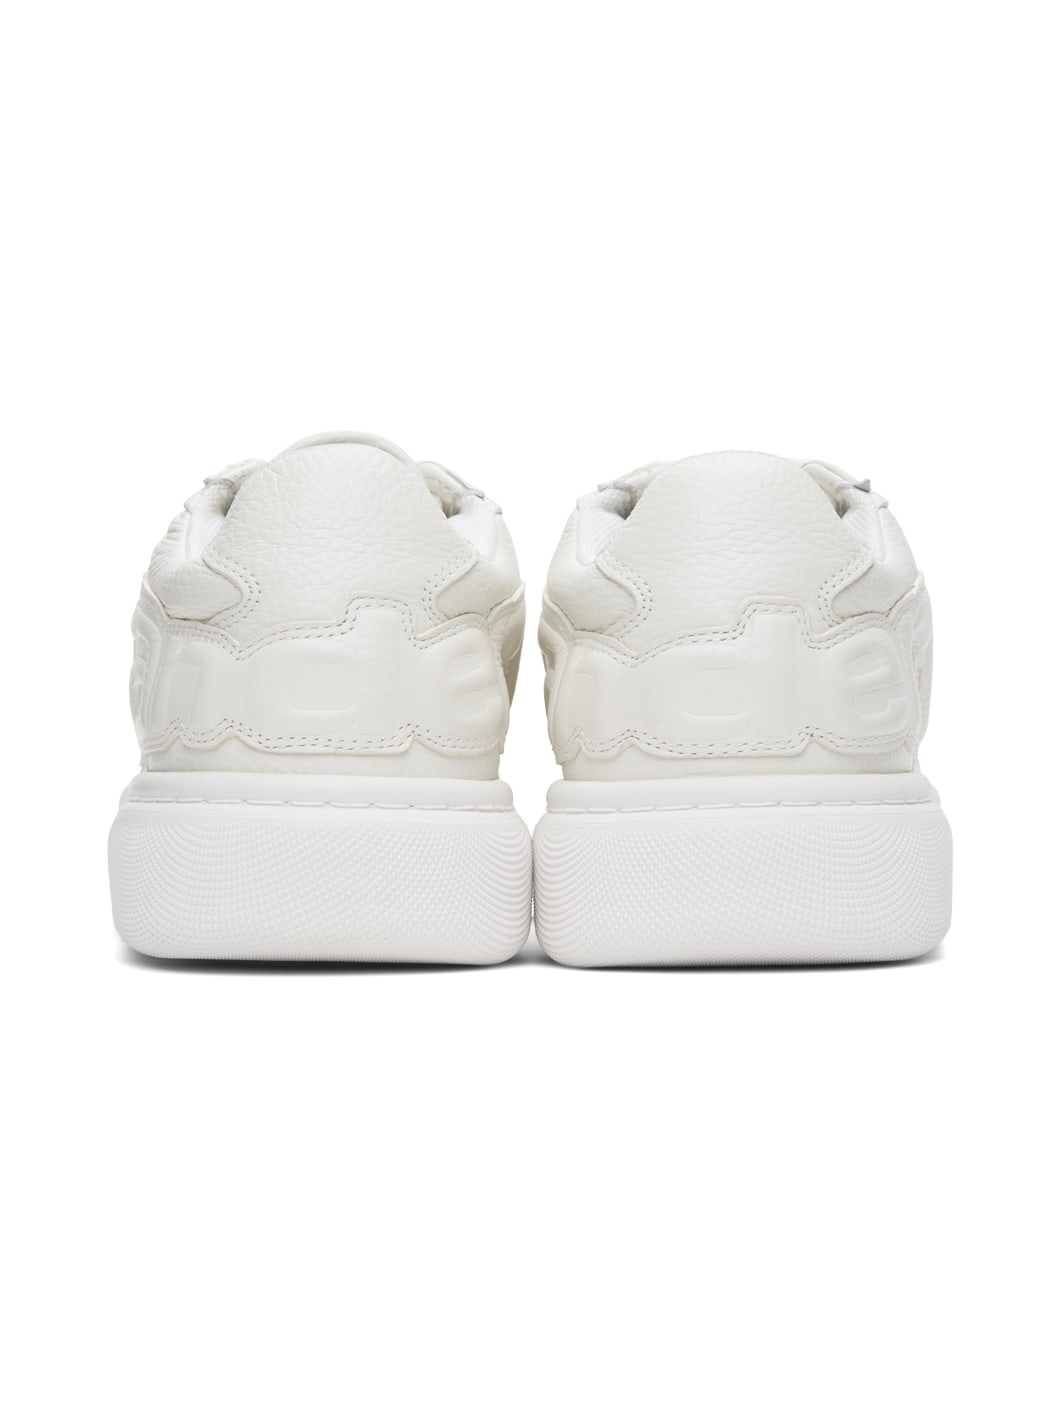 White Puff Sneakers - 2